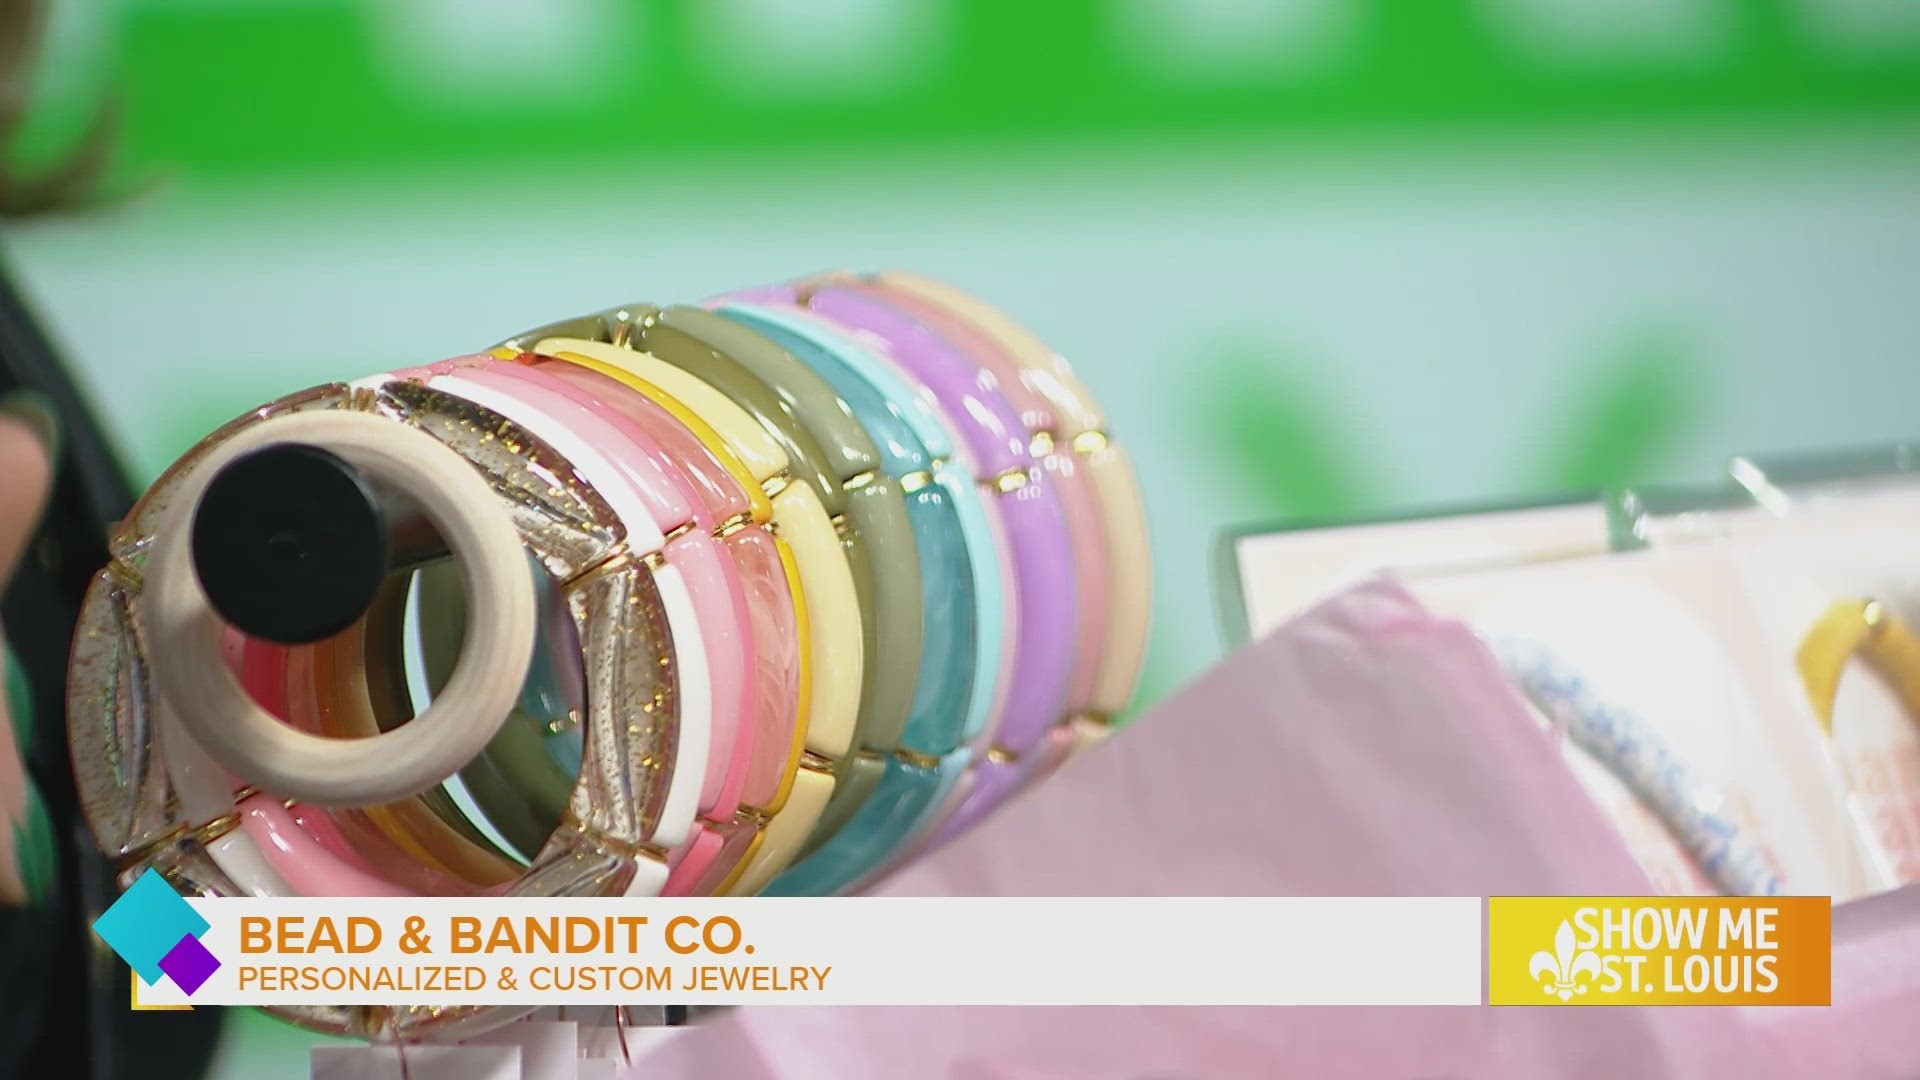 Bead & Bandit shares lucky charms, and customizable products